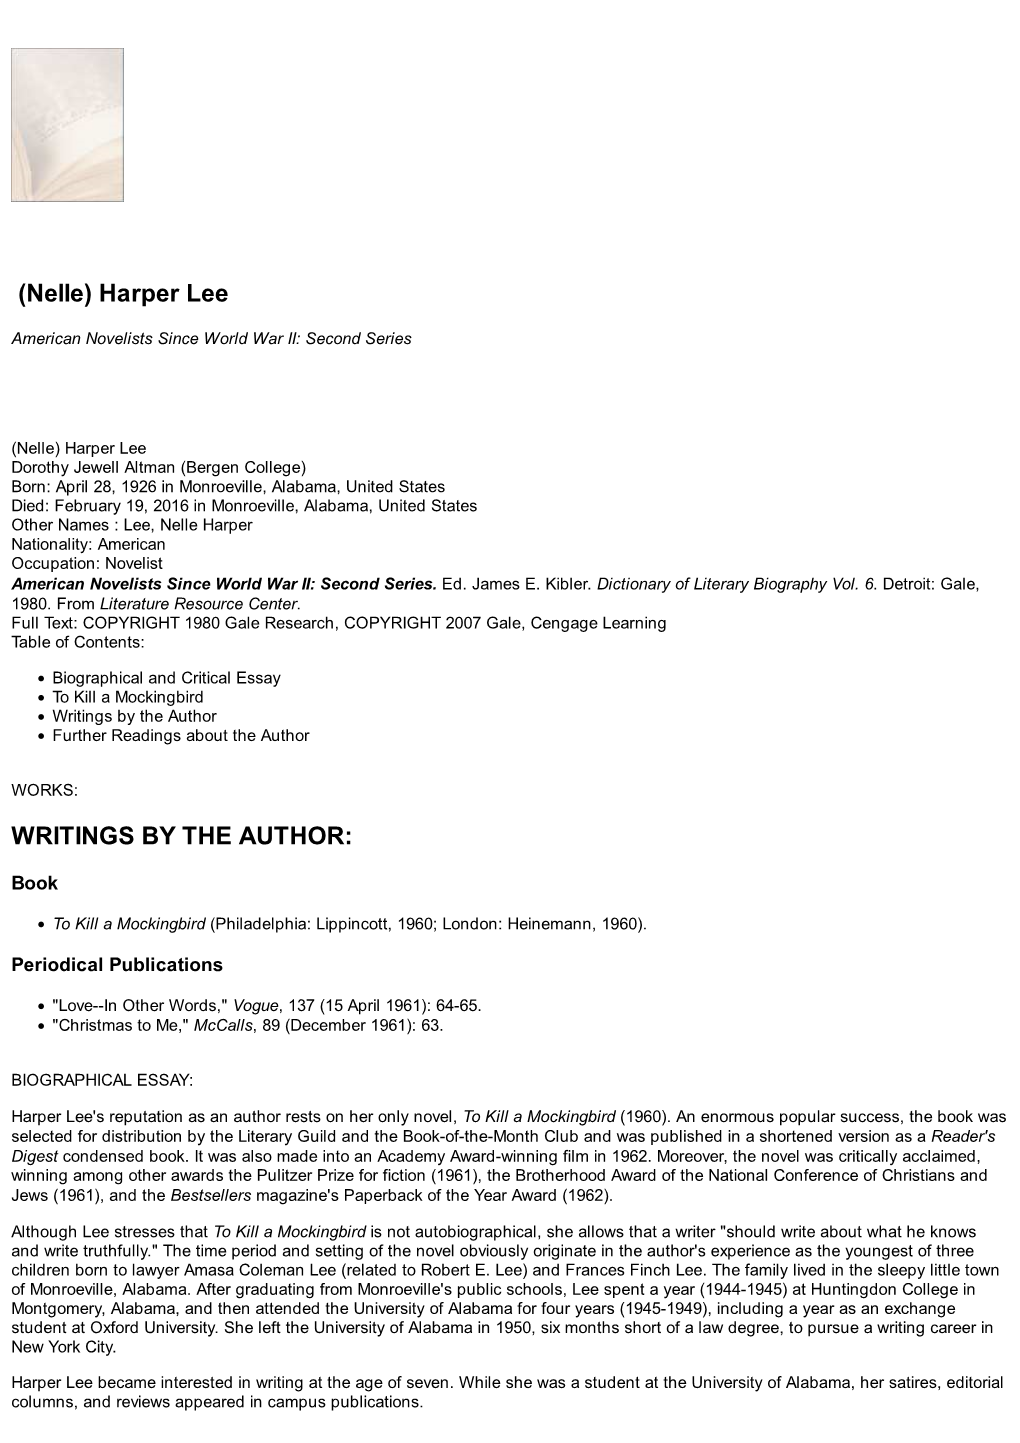 (Nelle) Harper Lee WRITINGS by the AUTHOR